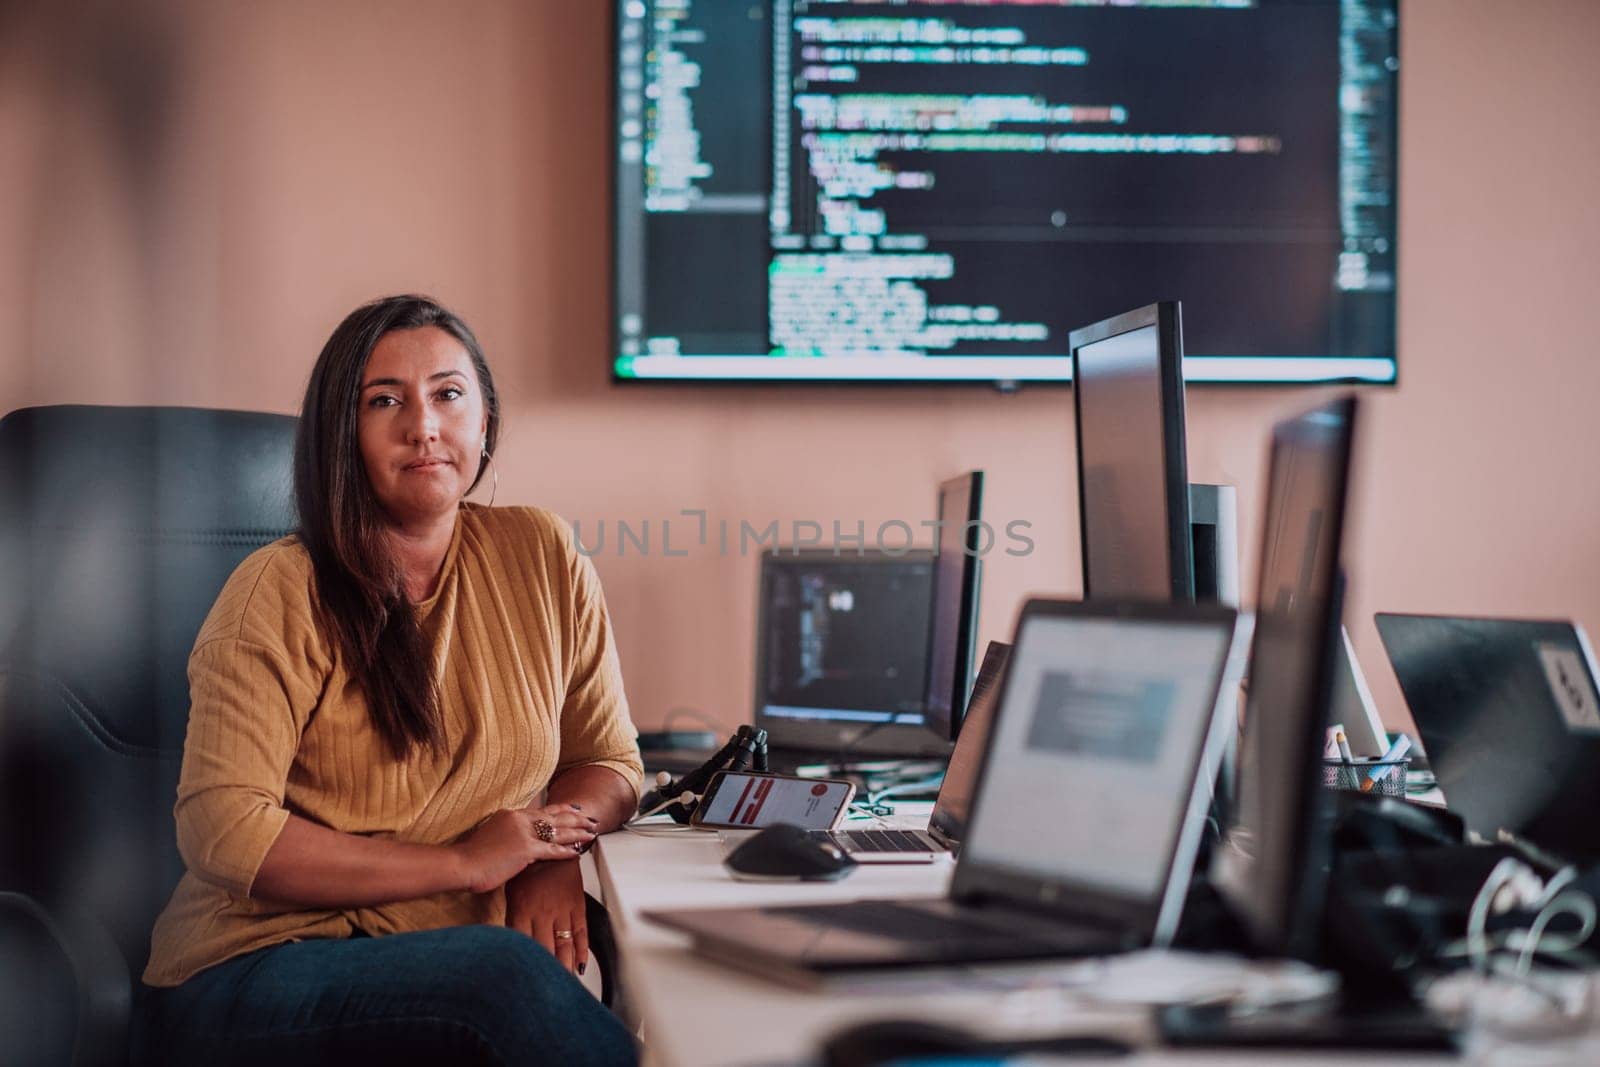 A businesswoman sitting in a programmer's office surrounded by computers, showing her expertise and dedication to technology